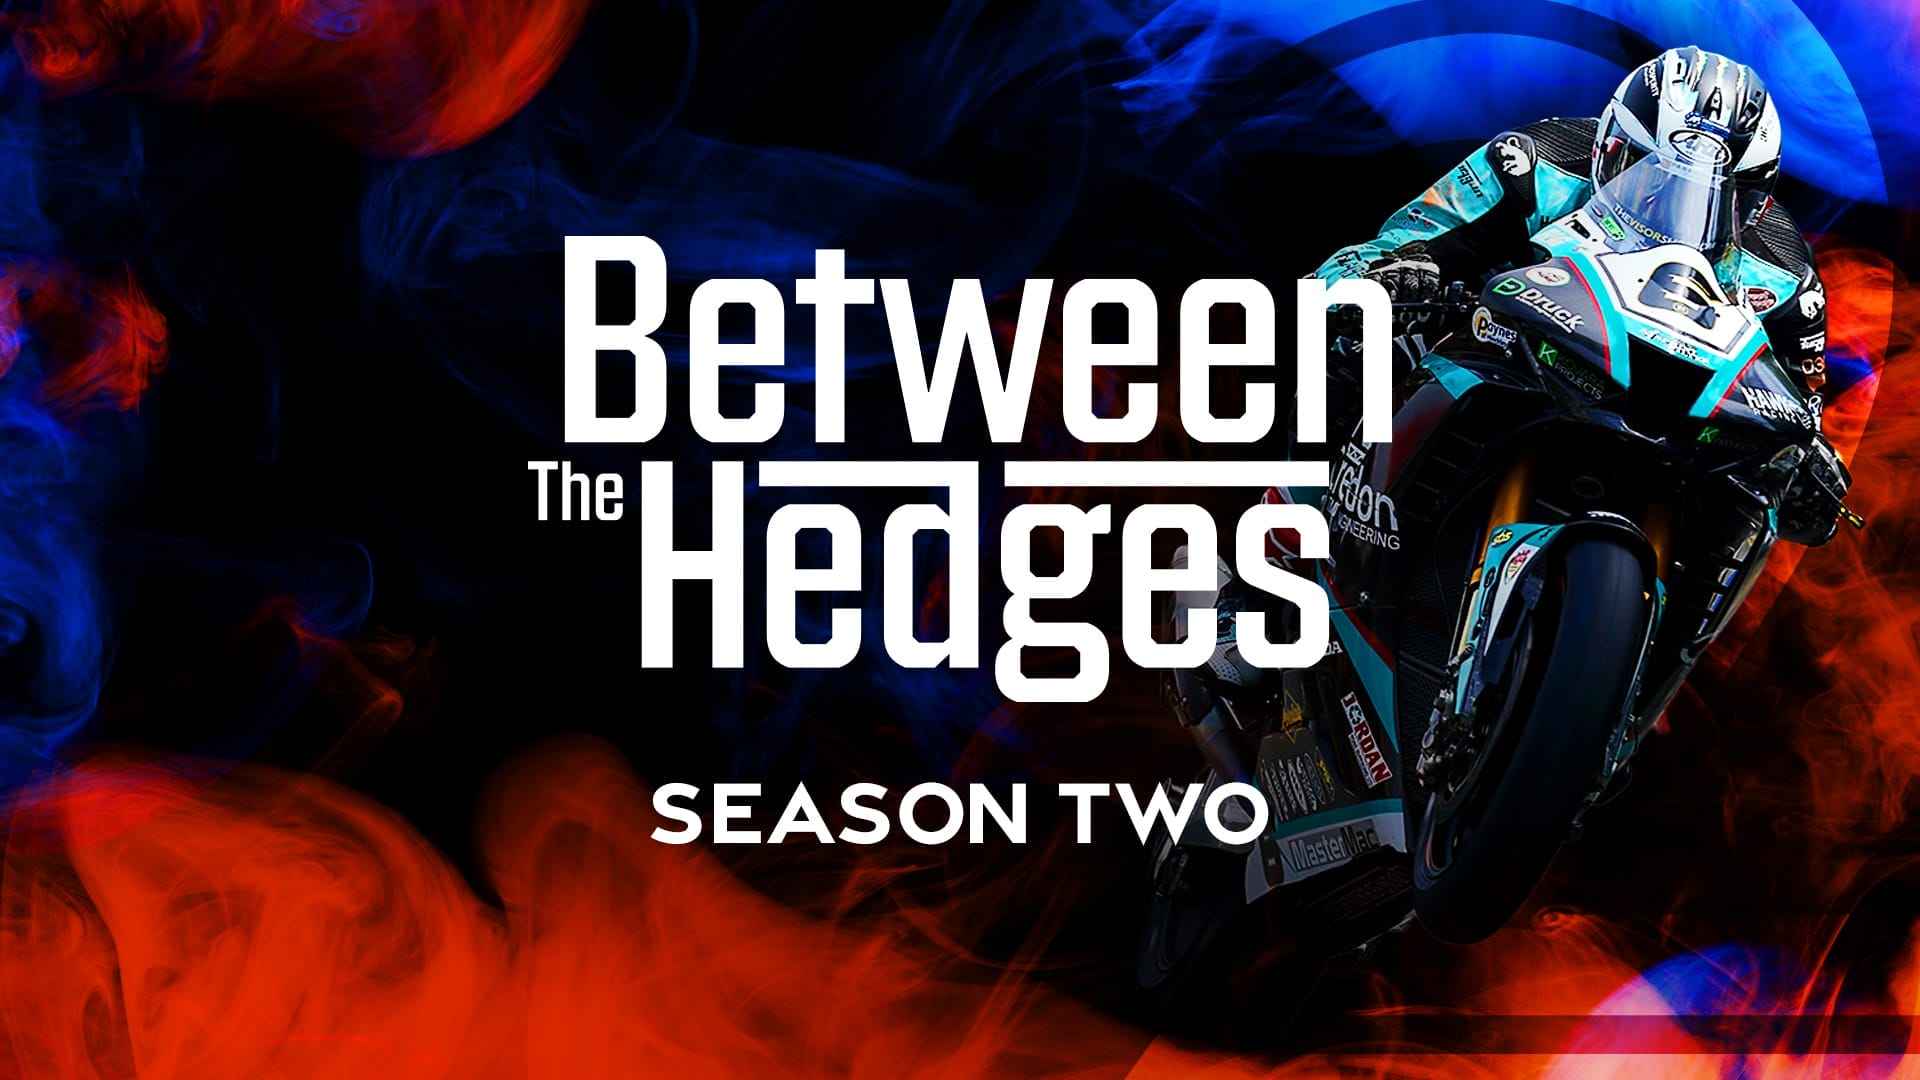 The fascination of the Isle of Man TT: insights and outlooks in the second season of “Between the Hedges”